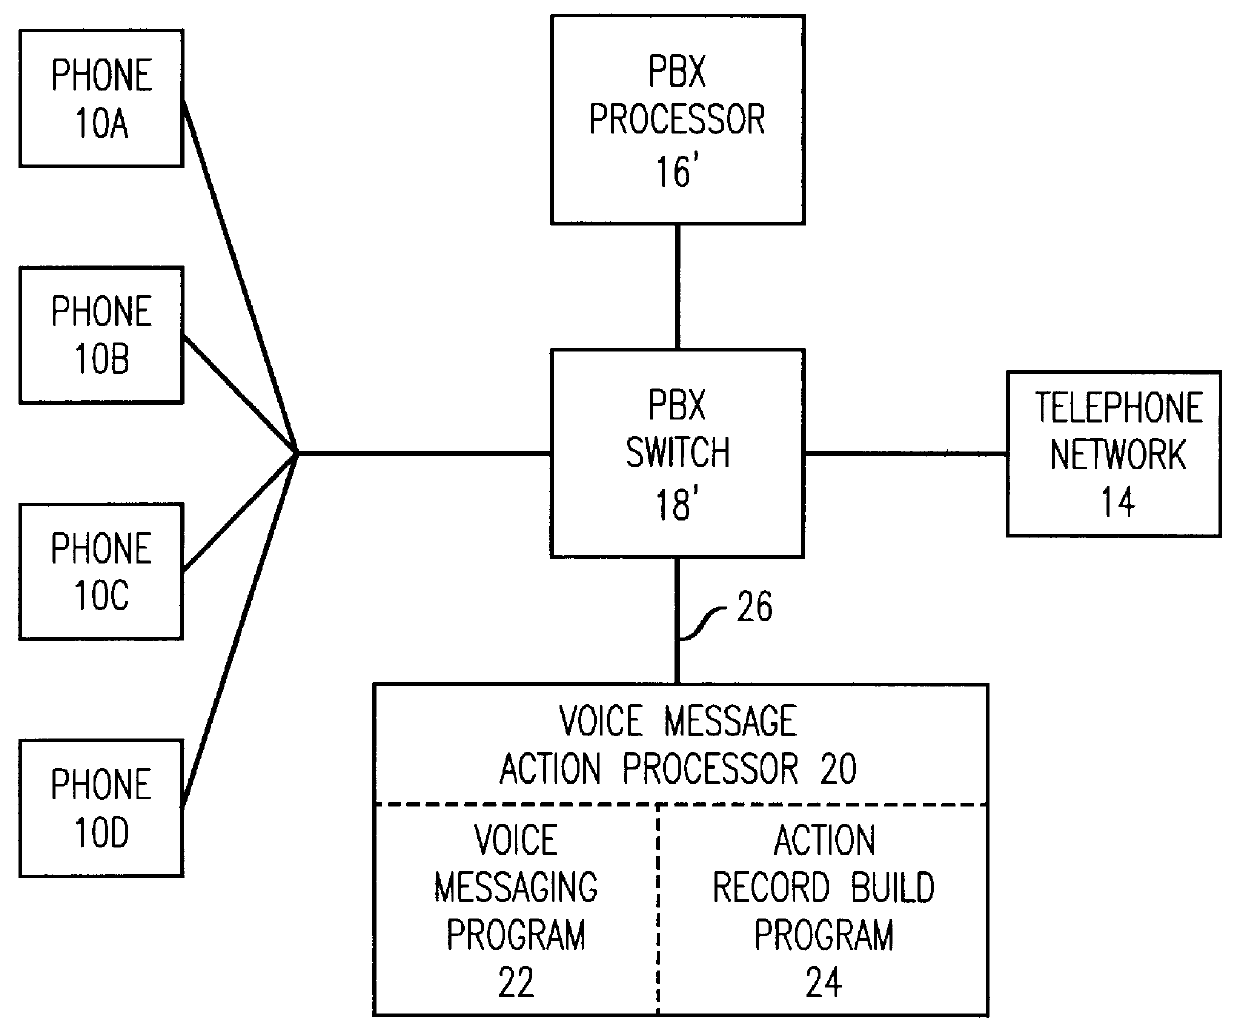 Background speech recognition for voice messaging applications